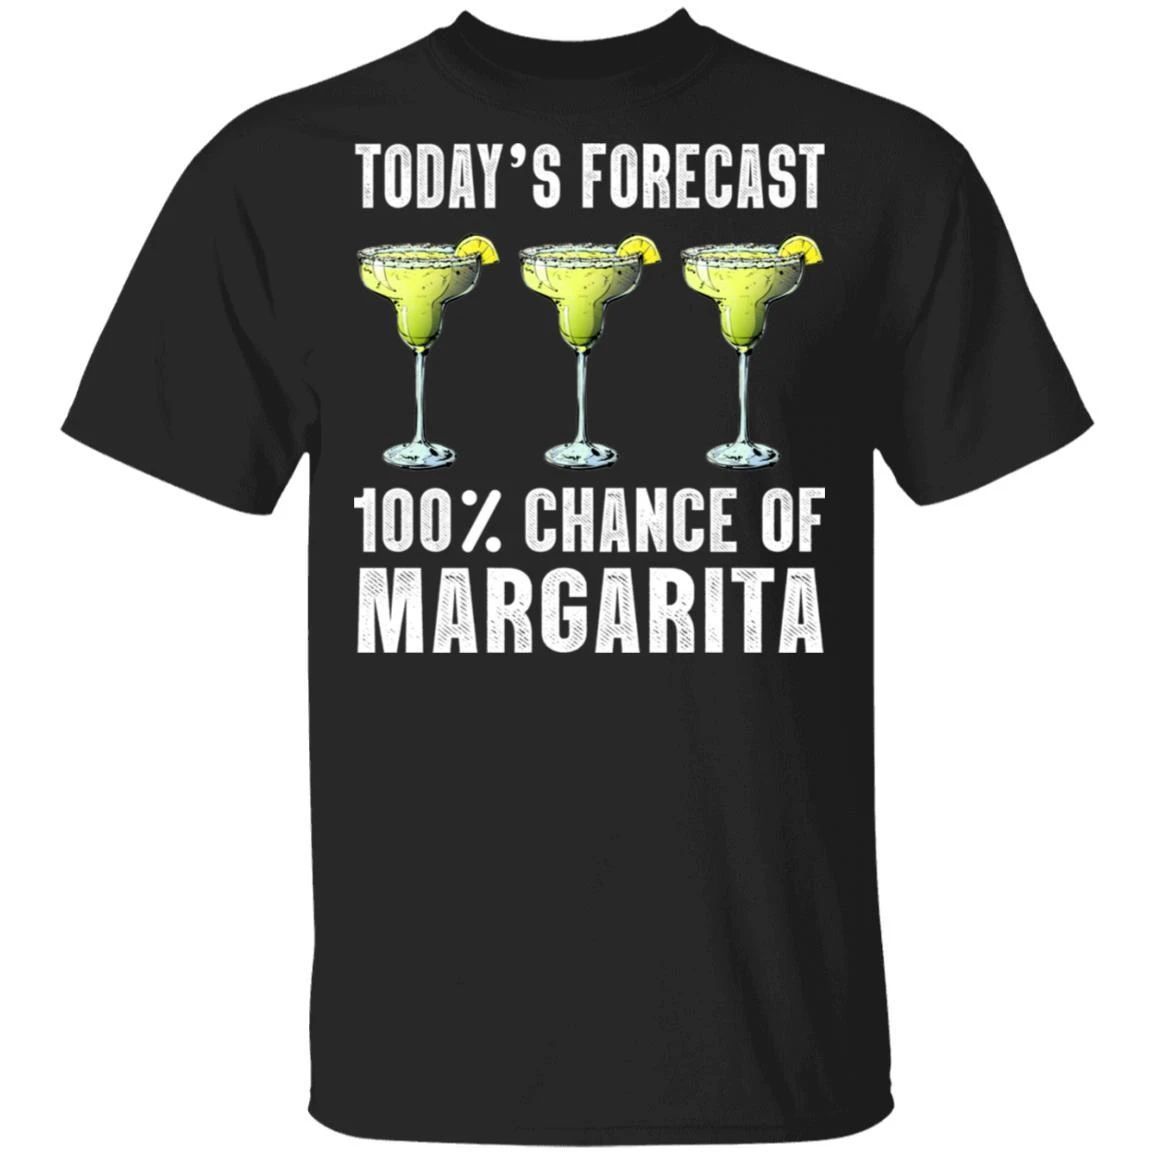 Today’s Forecast 100% Margarita T-shirt Cocktail Tee